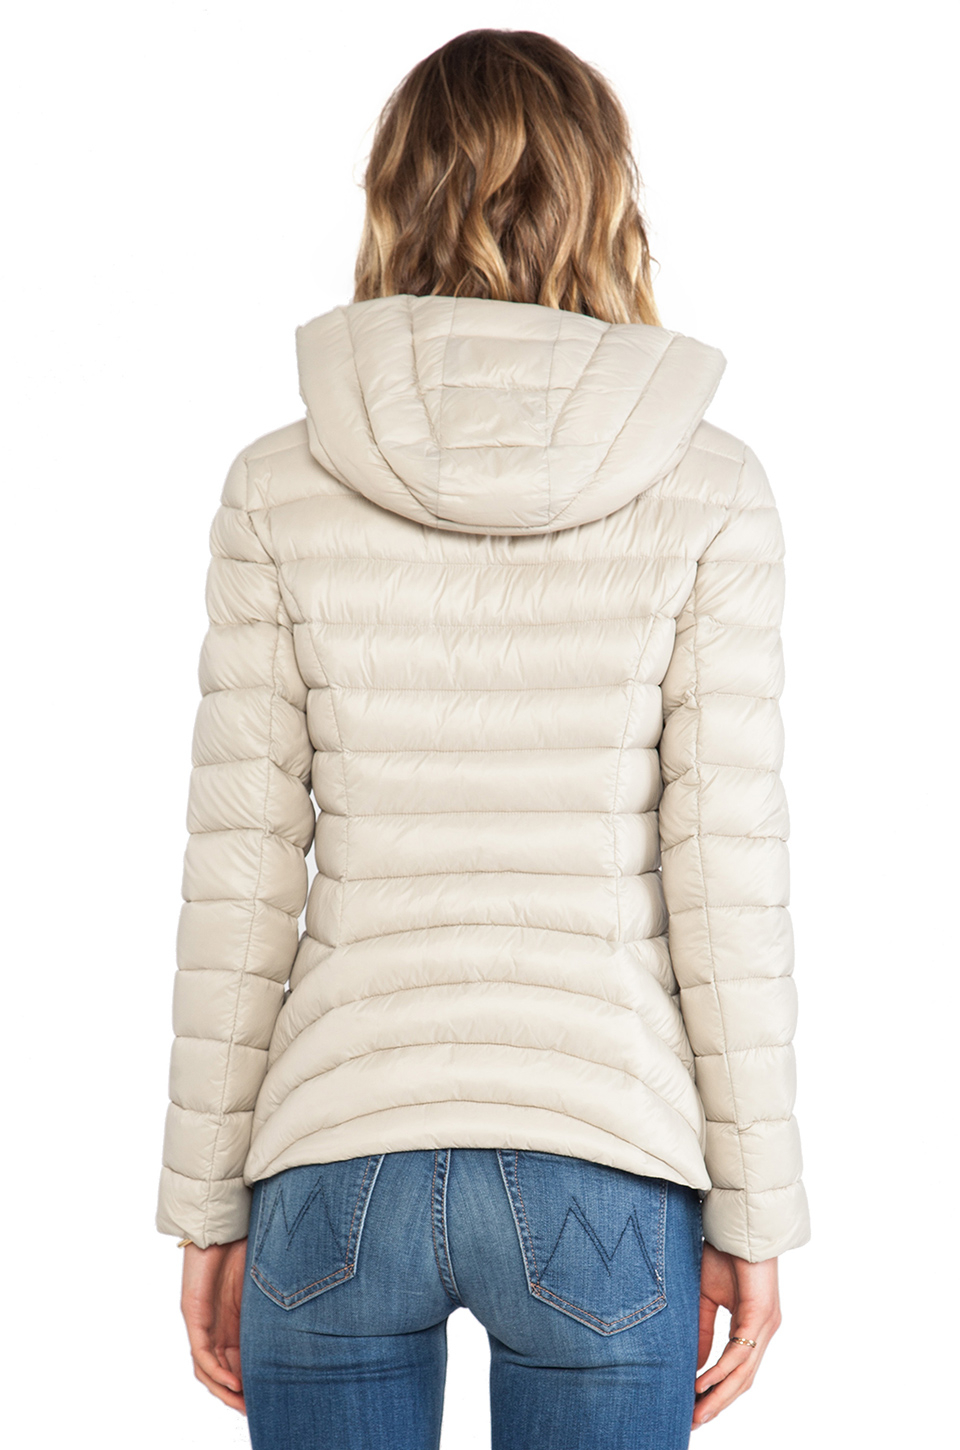 Soia & kyo Elfy Lightweight Down Jacket in Natural | Lyst